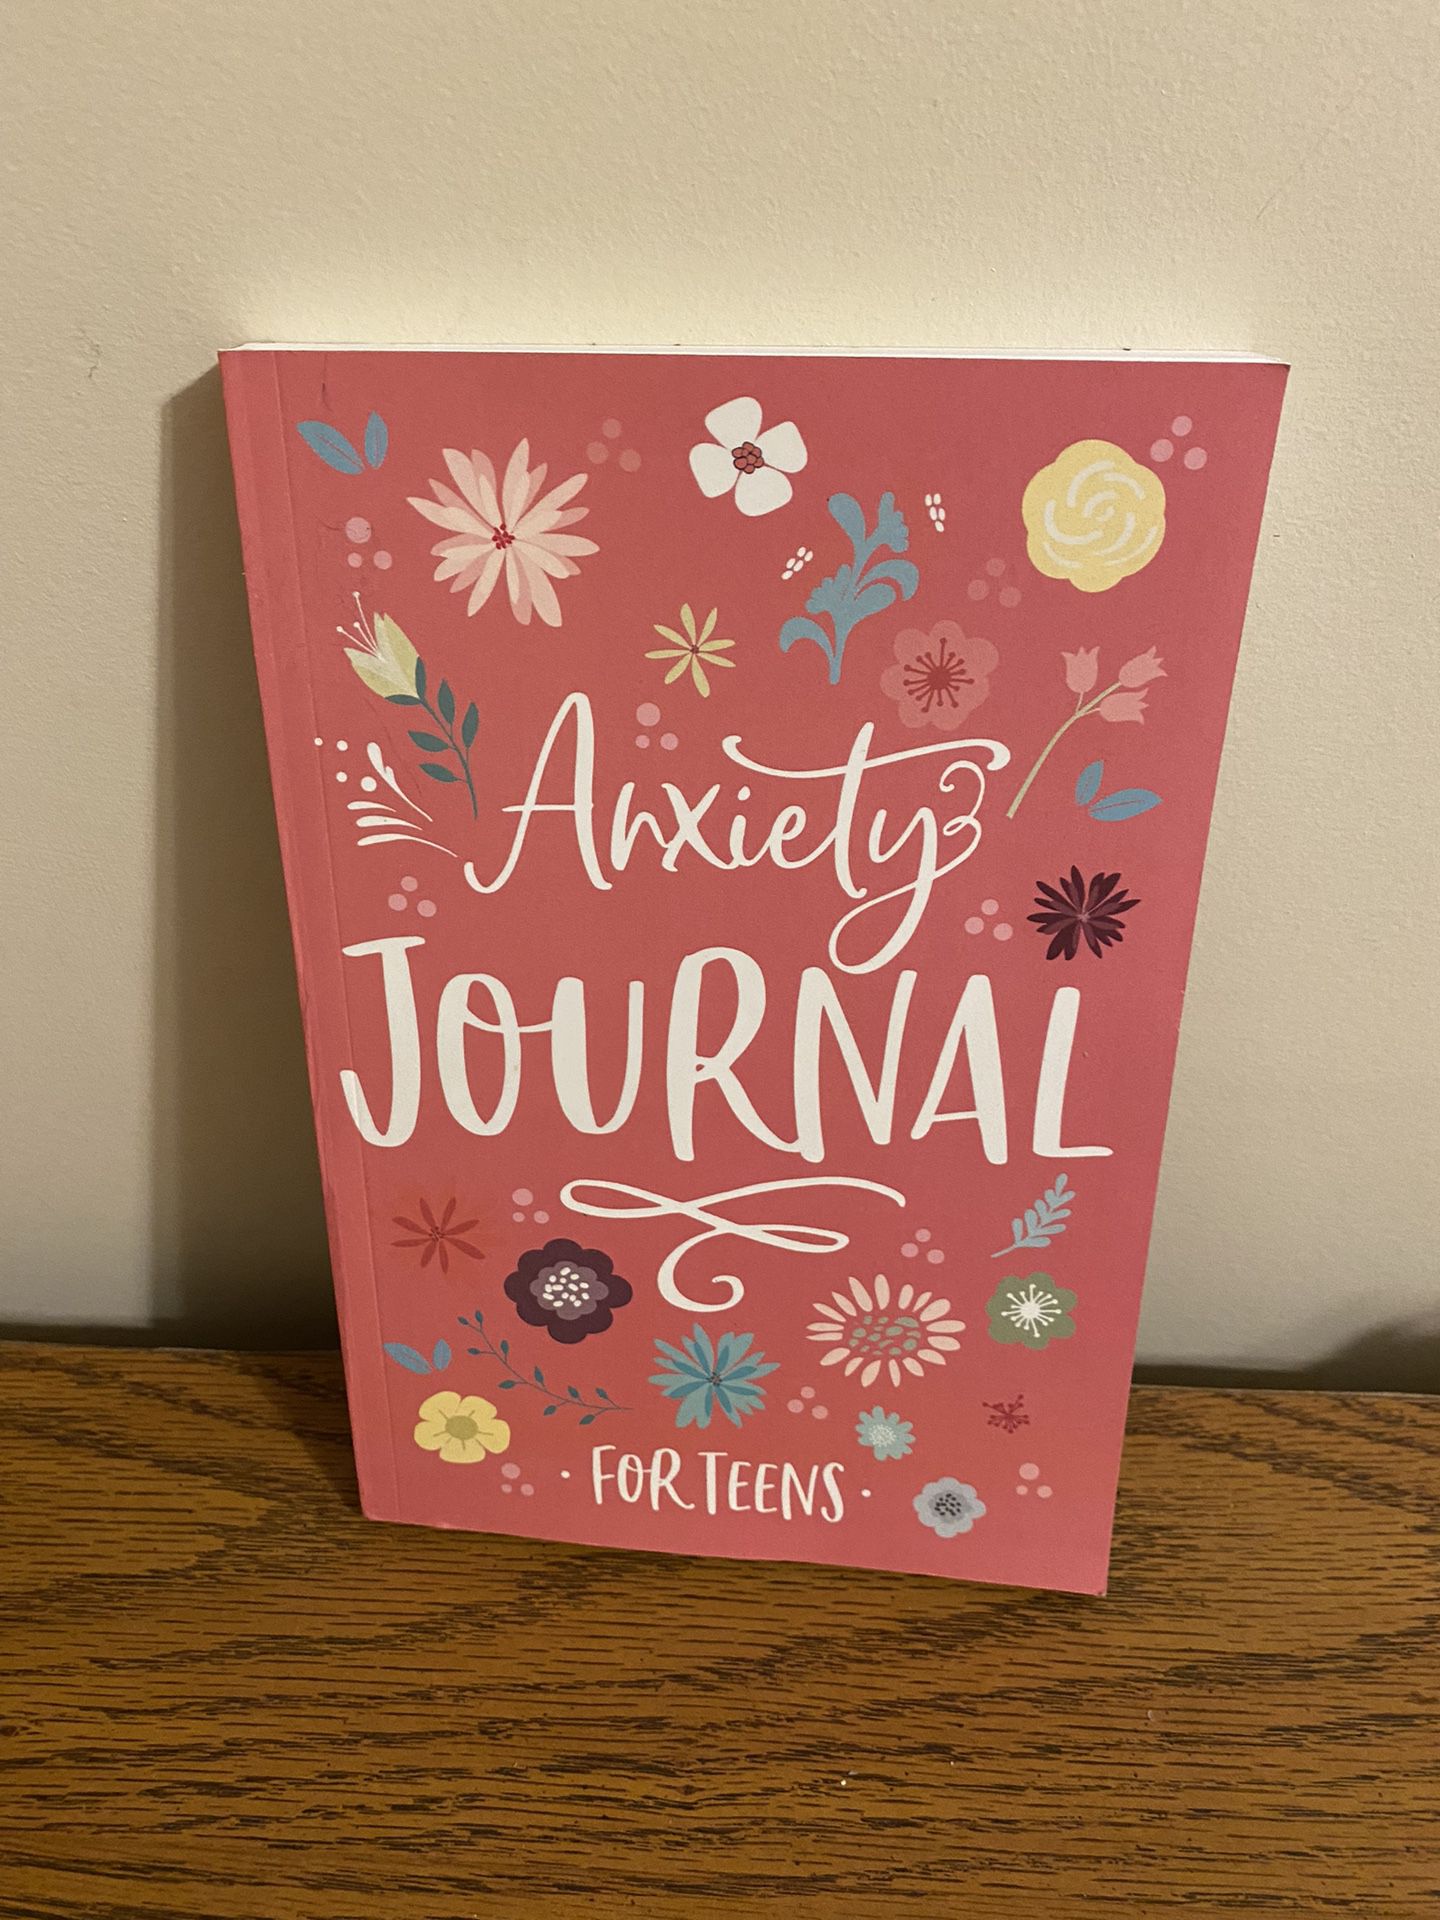 New Anxiety Journal For Teens 